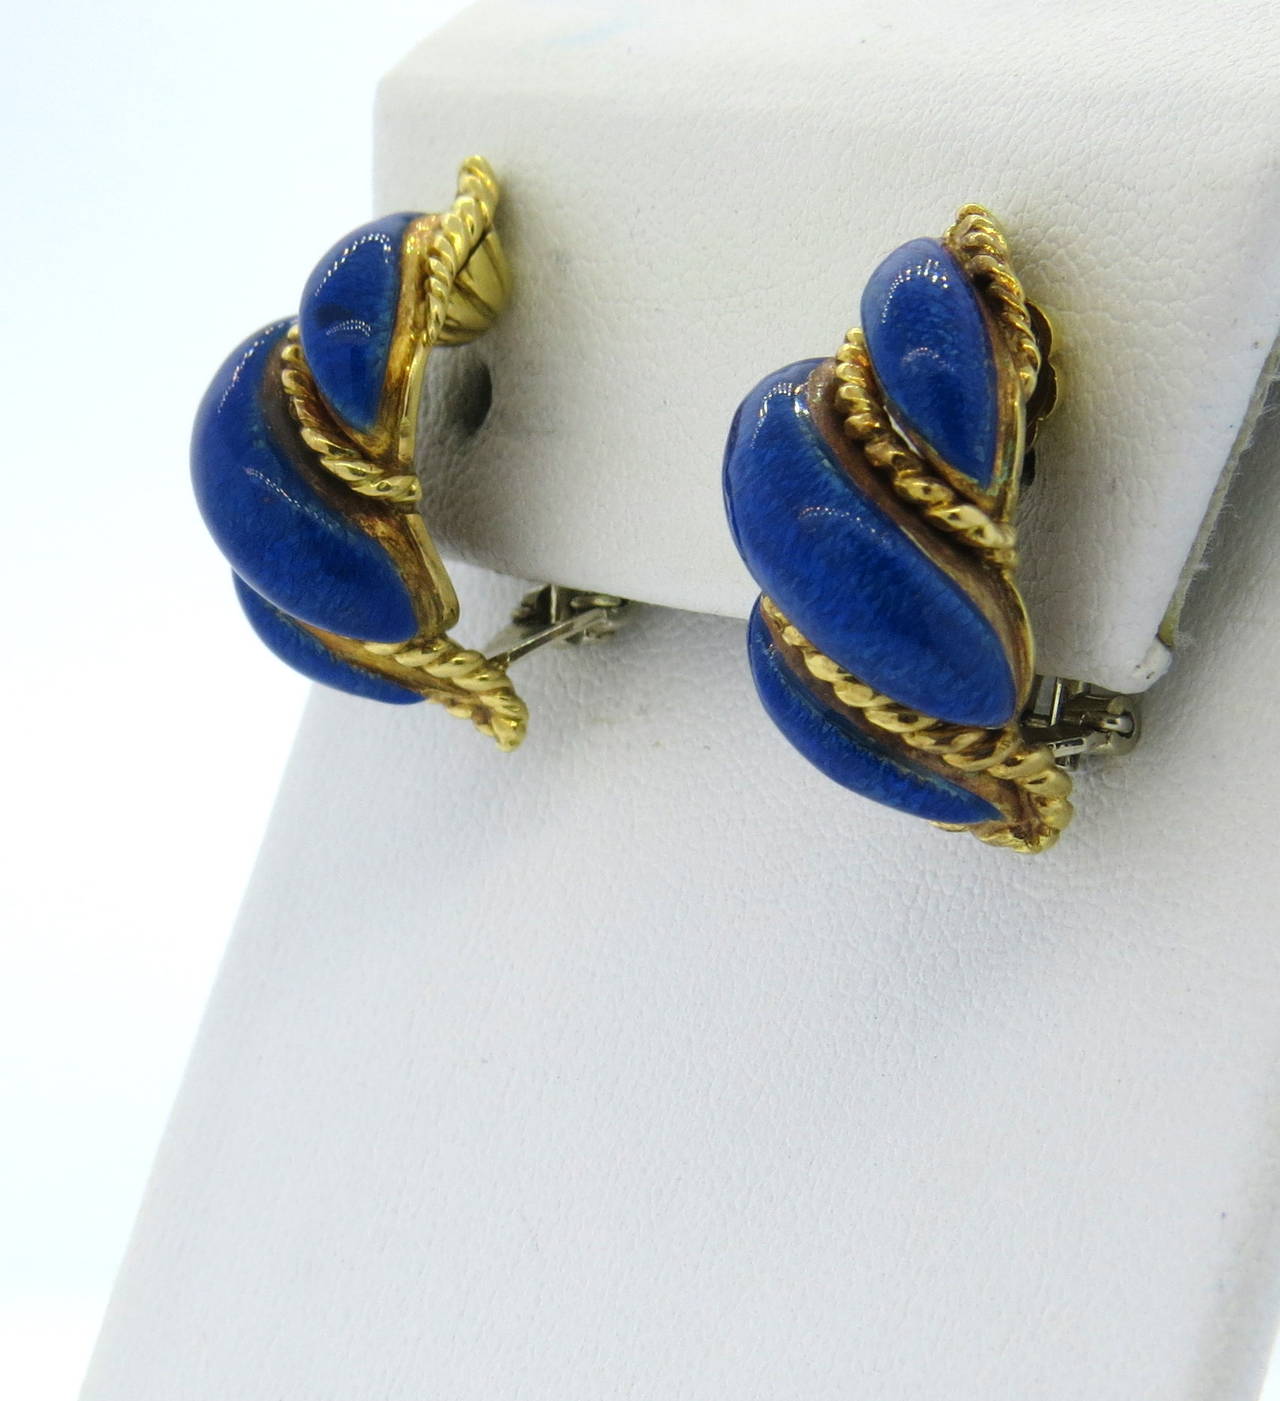 1960s Tiffany & Co 18k gold earrings, decorated with blue enamel. Earrings measure 23mm x 12mm. Marked Tiffany & Co. weight - 20.4 grams